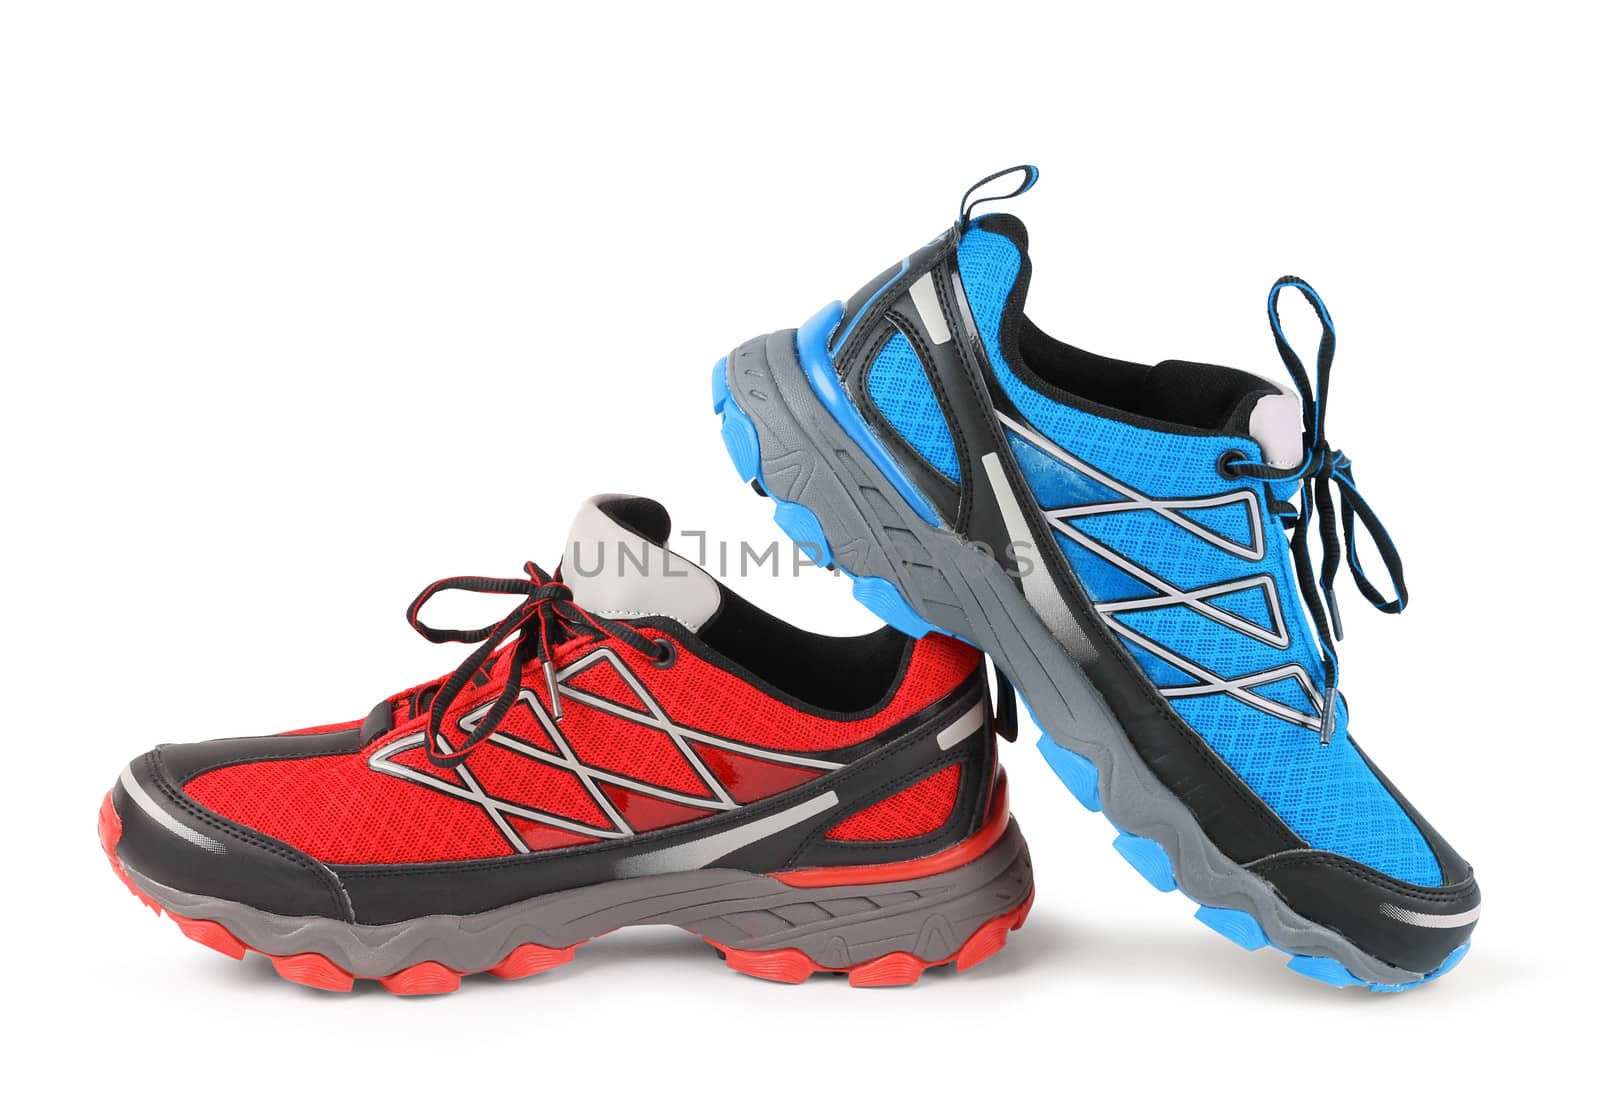 Red and blue running sport shoes isolated on white background